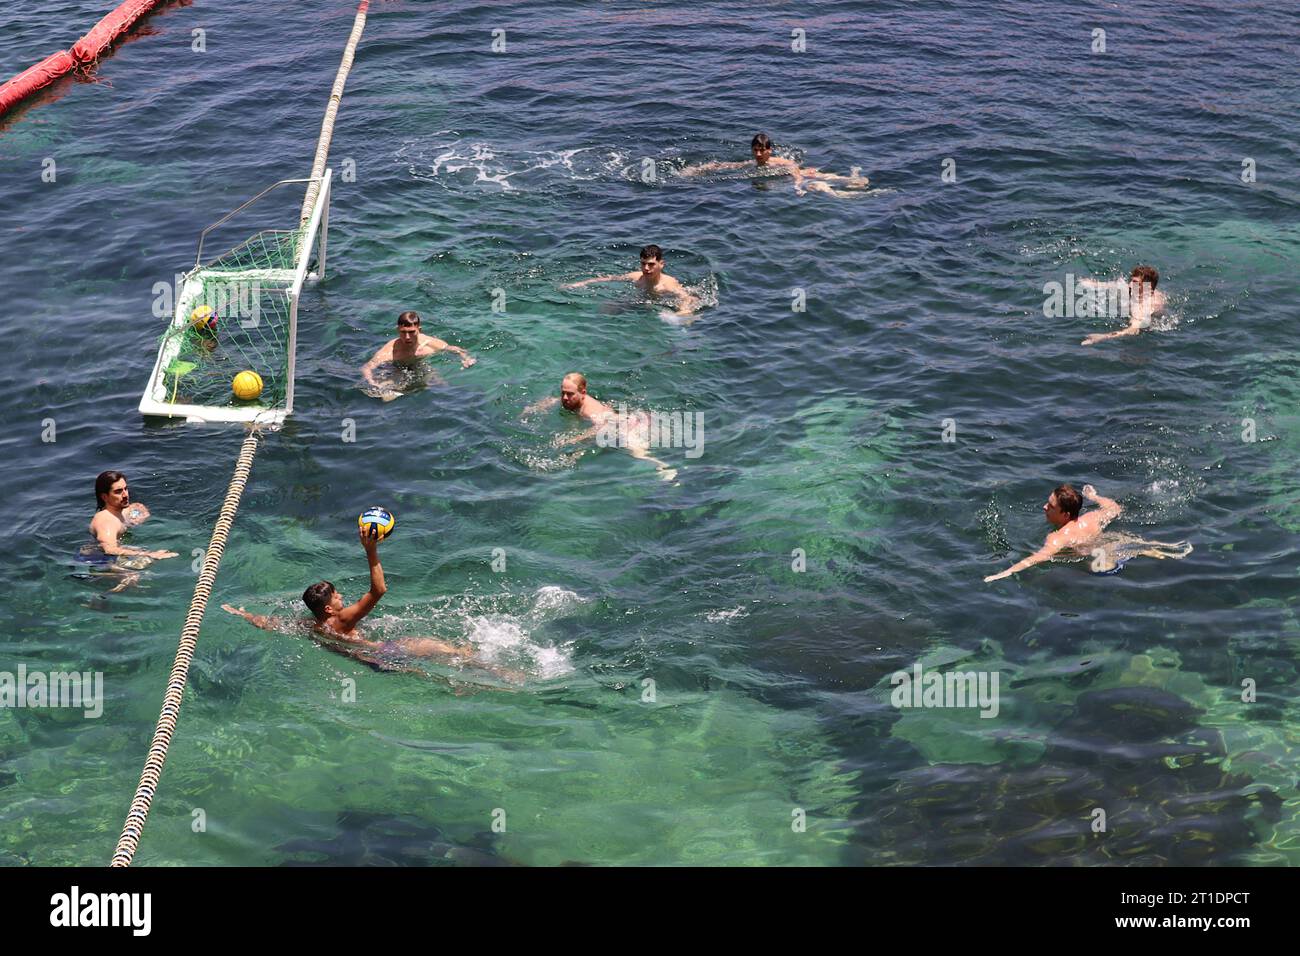 Water polo players swifty pass the ball during a training session in a sectioned off part of the Mediterranean at Marsalforn, Gozo, Malta, June 2022. Stock Photo